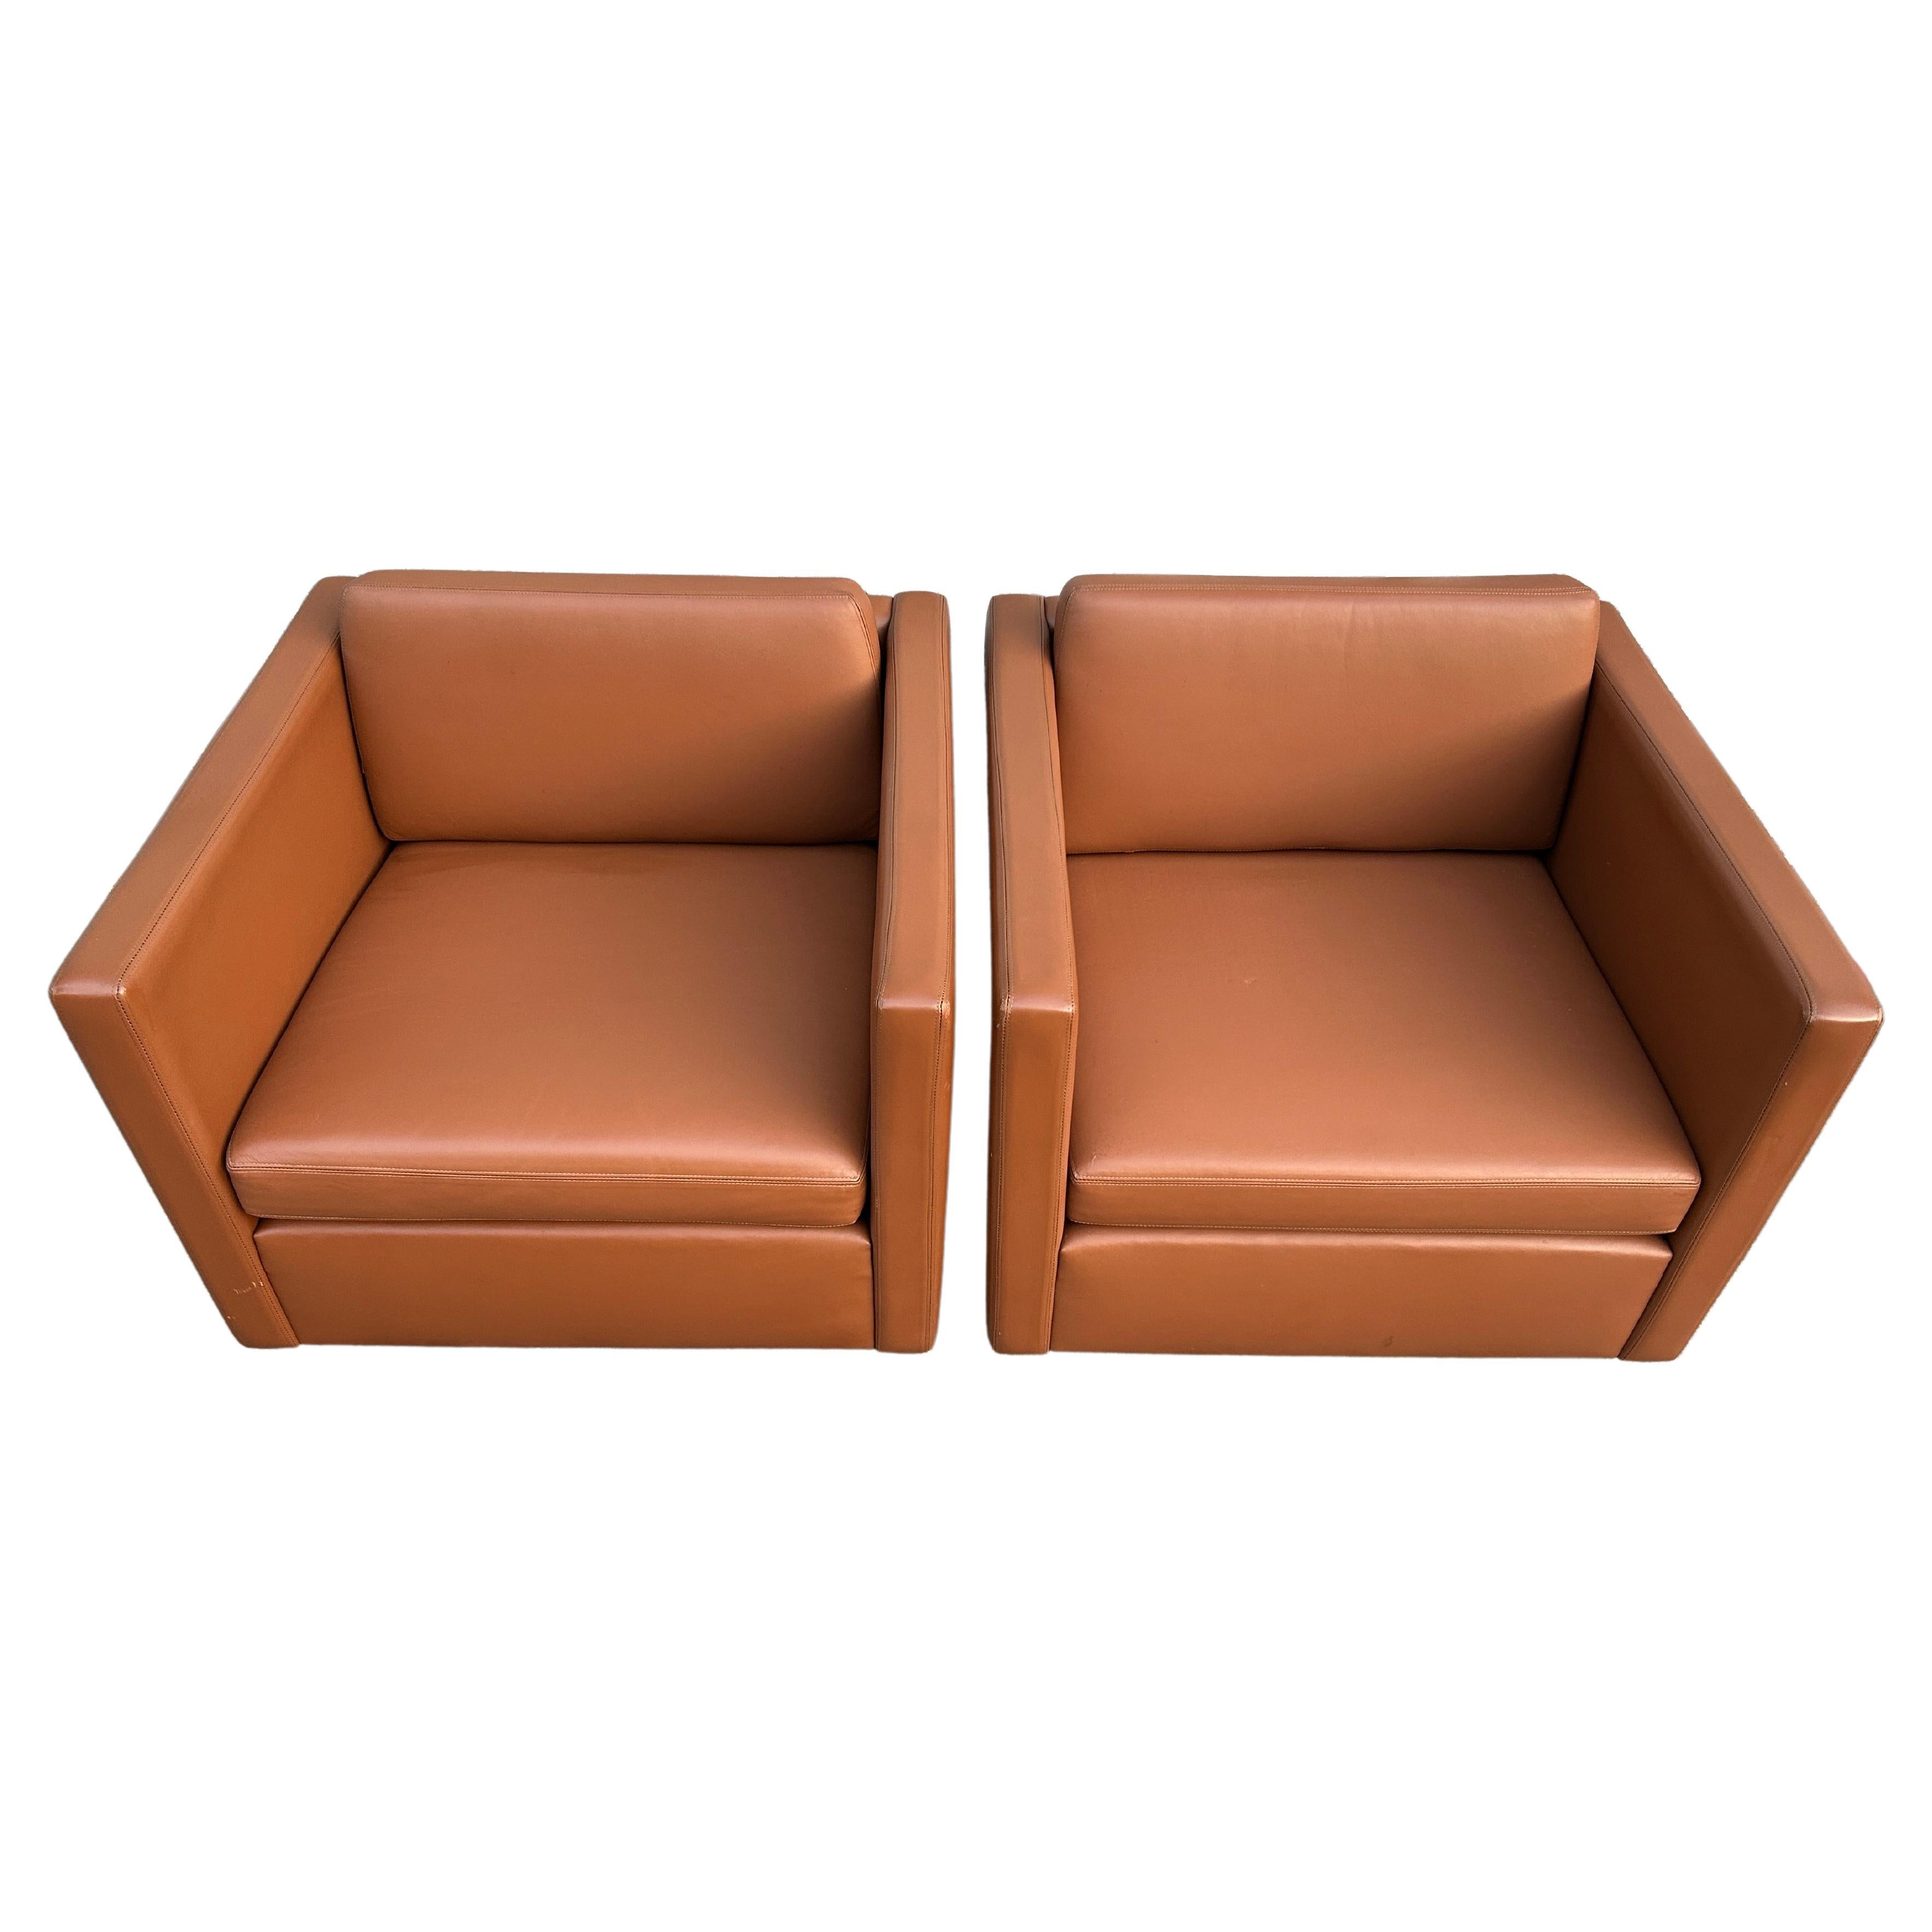 Woodwork Superb Mid-Century Modern Pfister Cube Lounge Chairs by Knoll in Cognac Leather For Sale